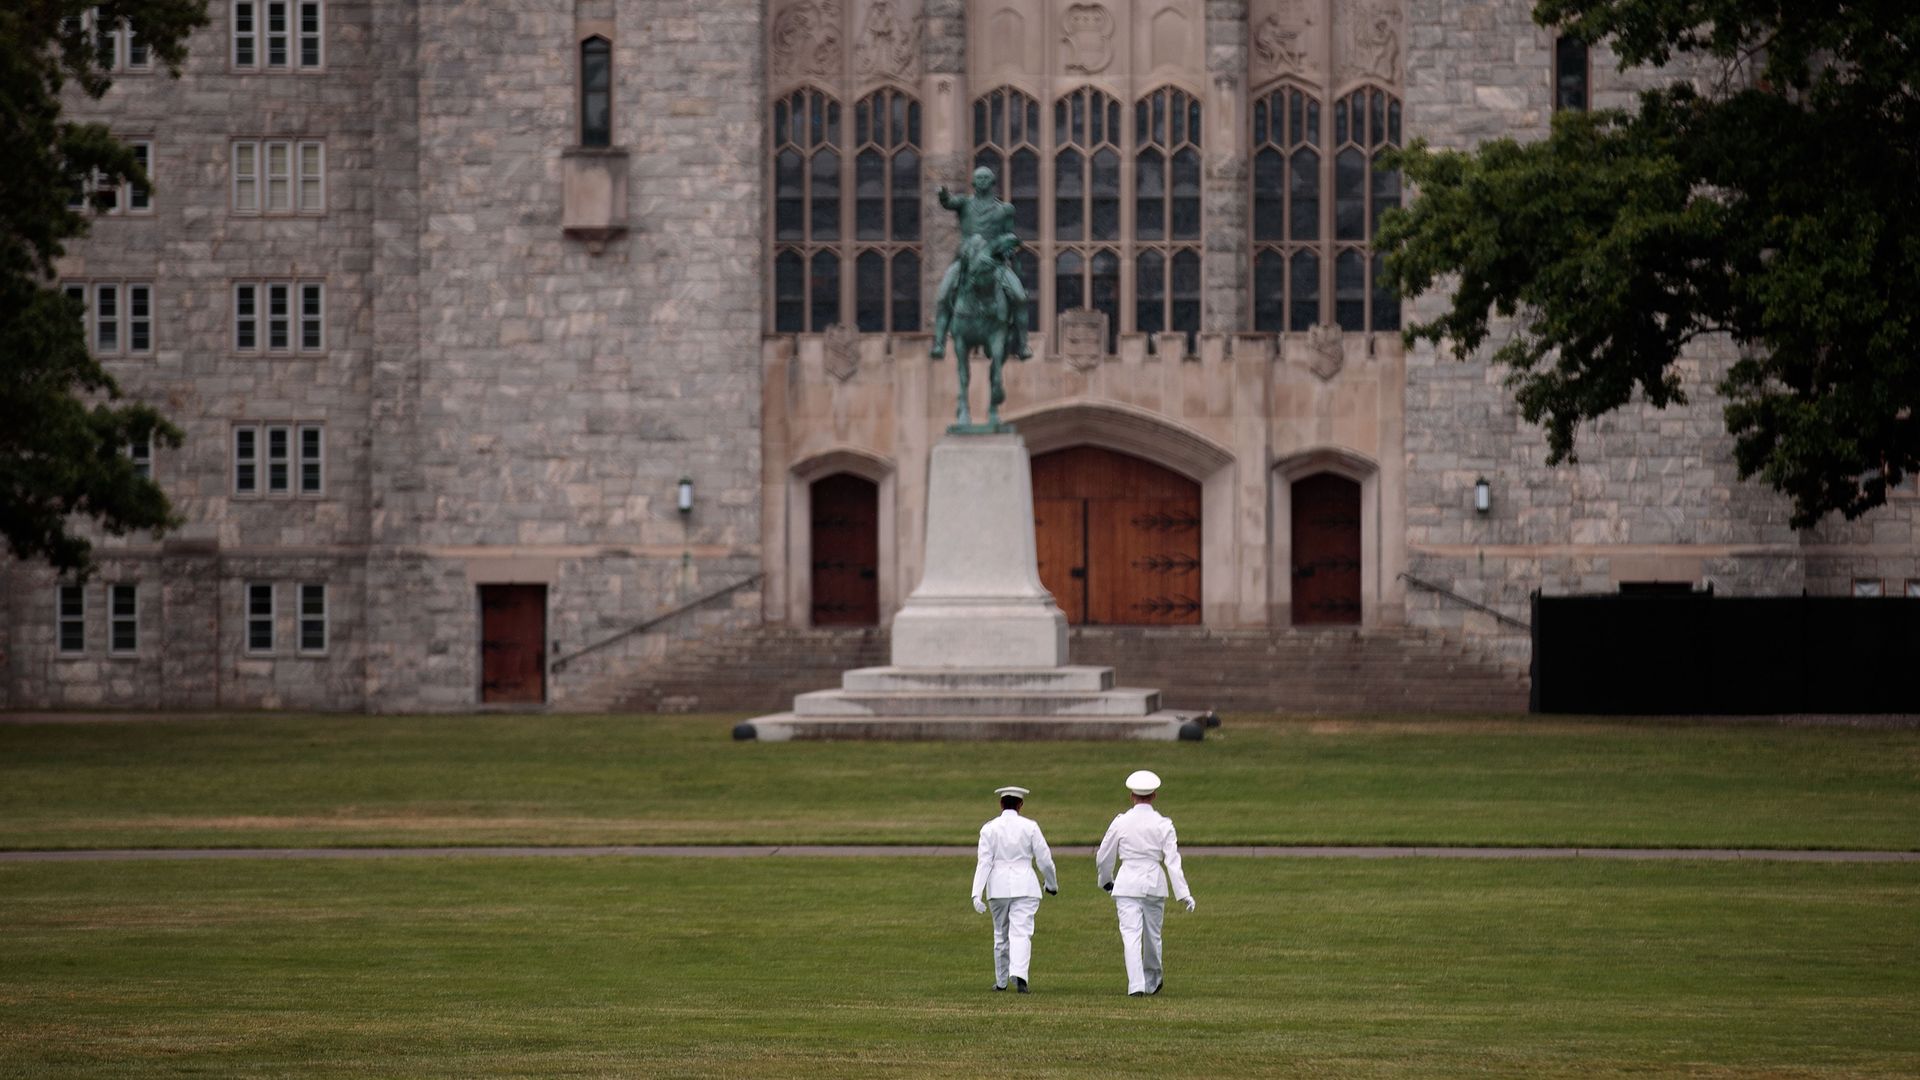 Cadets outside the United States Military Academy at West Point in 2016 in New York.